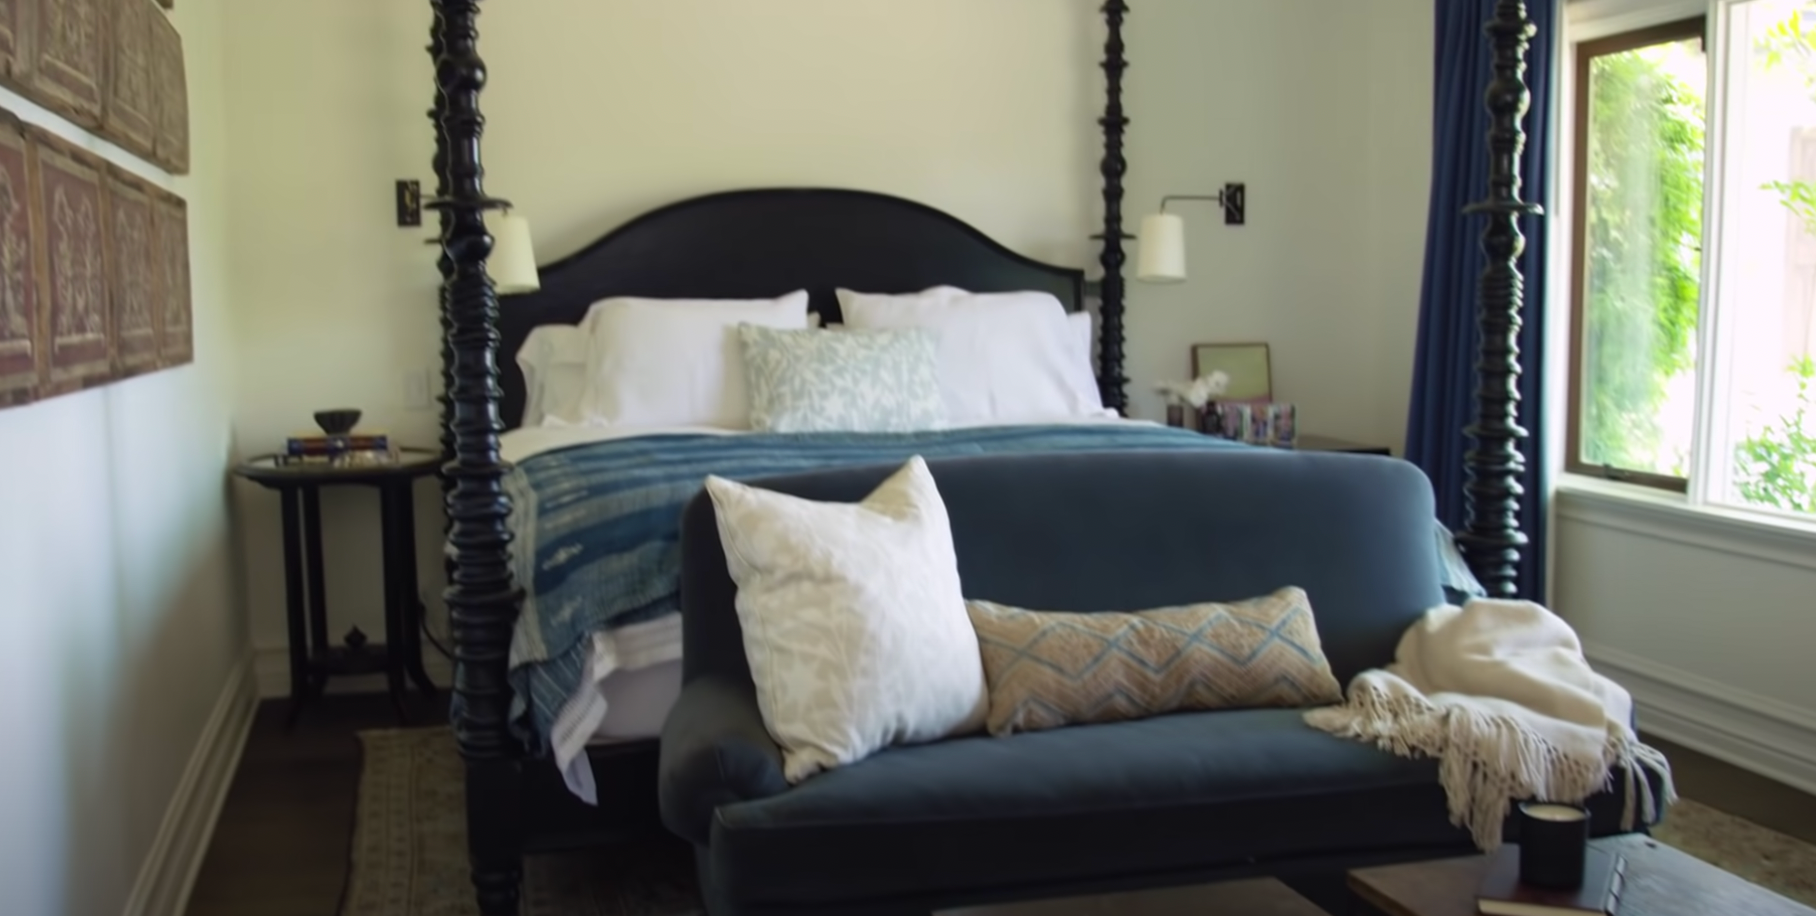 John Stamos and Caitlin McHugh's master bedroom with views of the valley in their former home in Los Angeles | Source: YouTube@ArchitecturalDigest